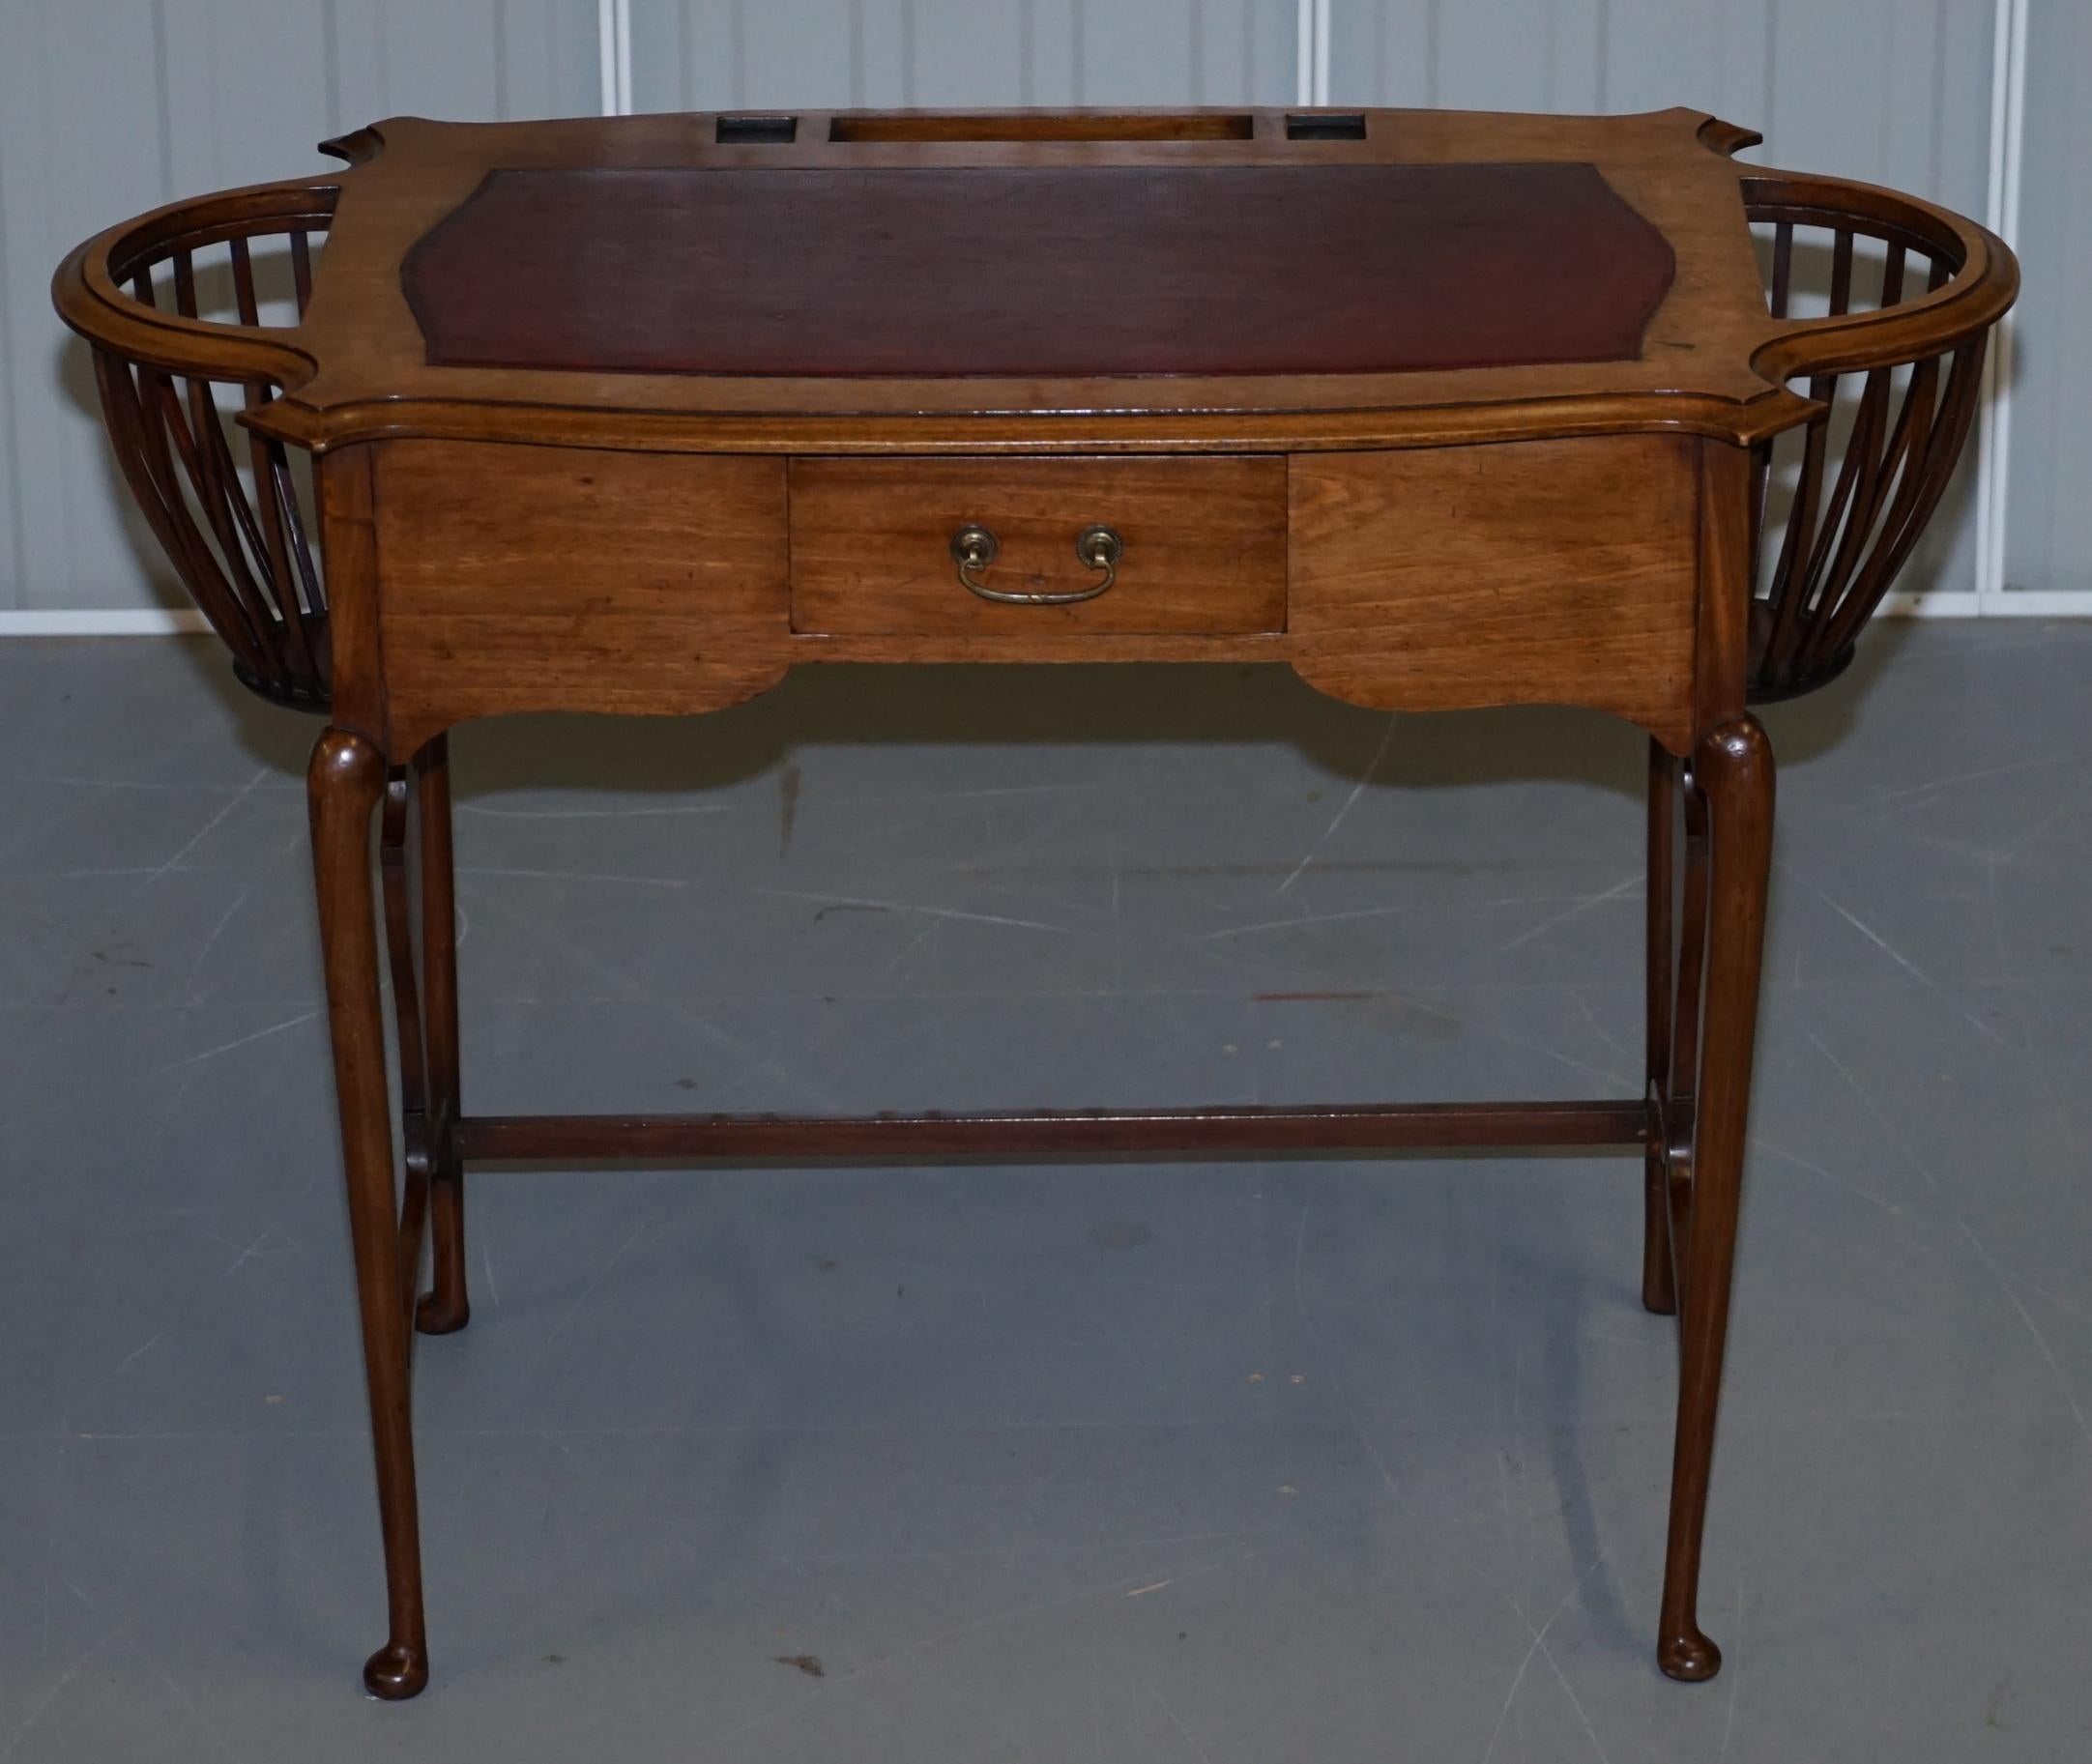 We are delighted to offer for sale this very rare Victorian circa 1860 Sheraton Revival light mahogany desk with built in plant baskets and an oxblood leather writing surface

A very rare desk, I have never seen anything like it in terms of having